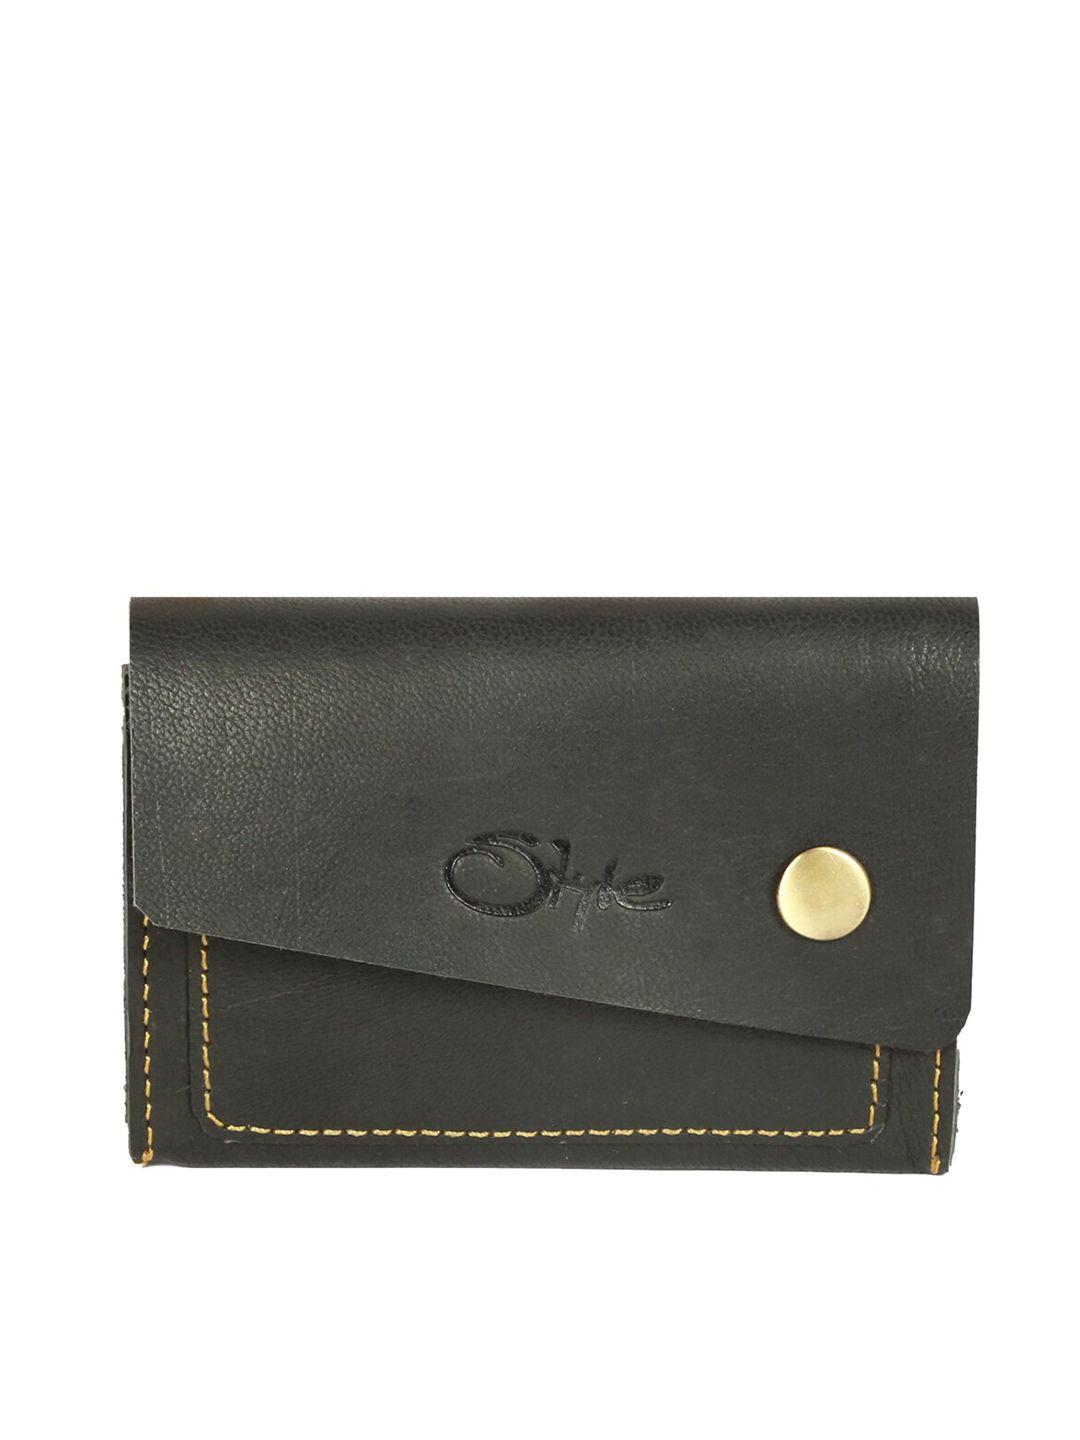 style shoes rfid blocking leather credit card holder